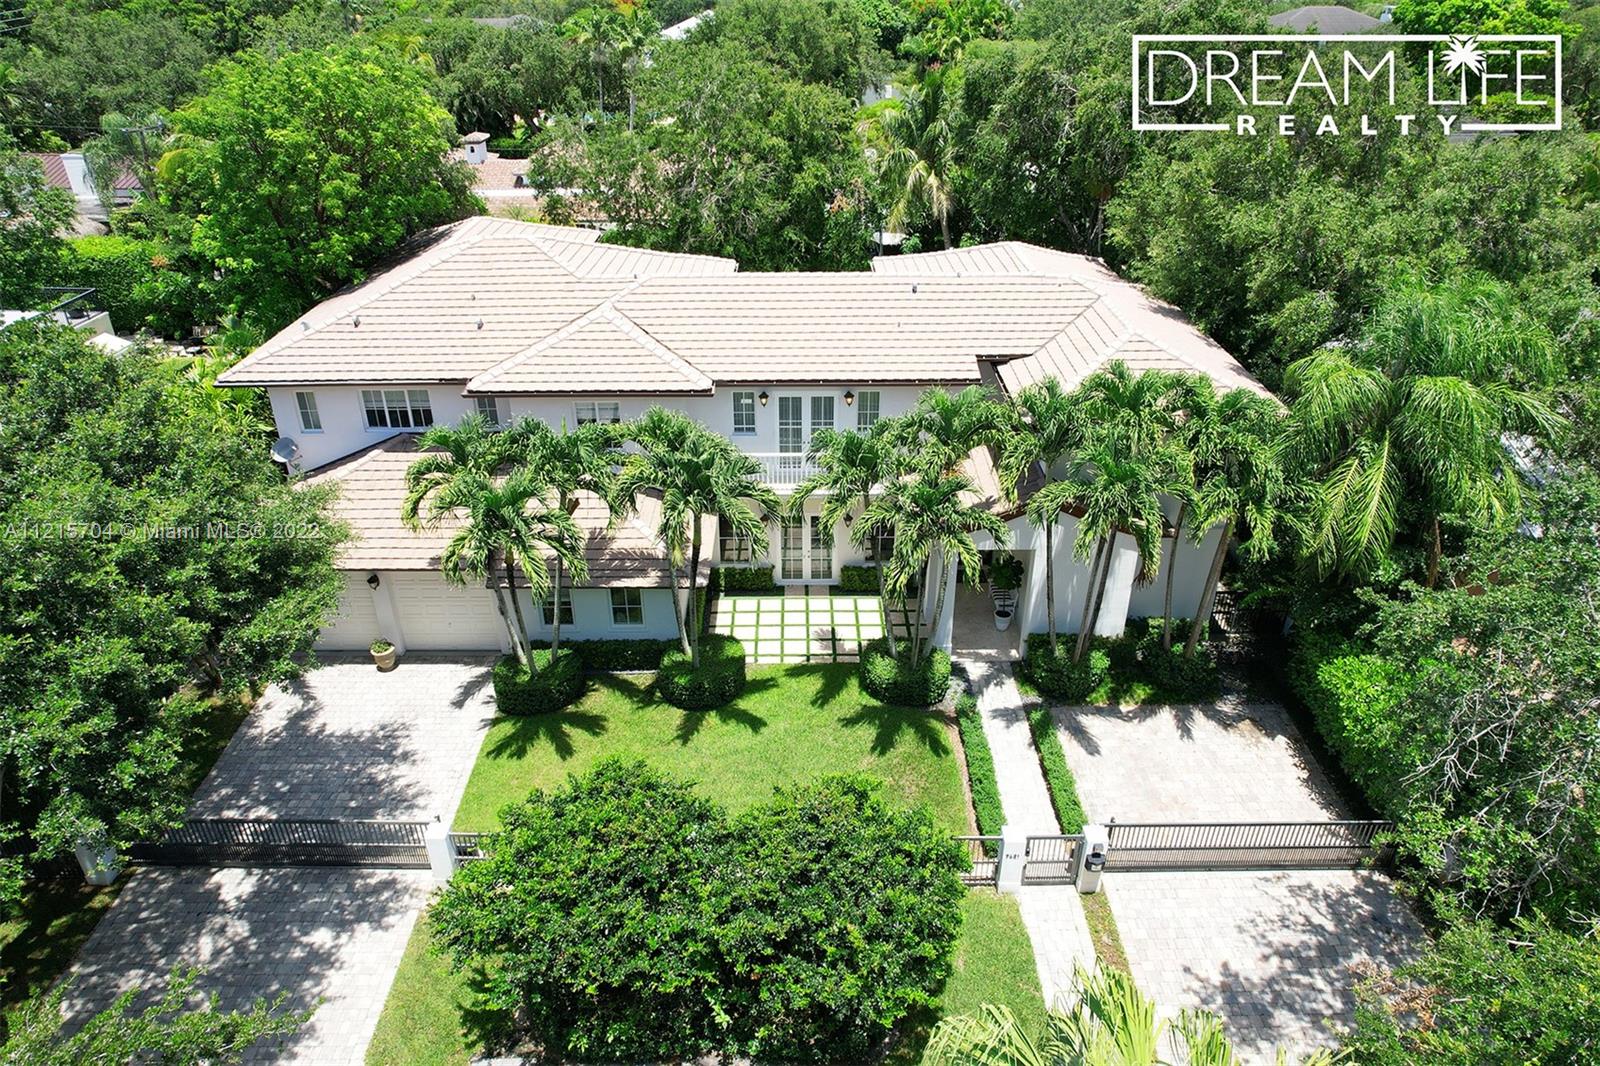 LOOKING FOR A BEAUTIFUL HOME IN CORAL GABLES / SOUTH MIAMI?
BUILT BETWEEN  2007 AND 2008 IN THE HIGH PINES / PONCE ROAD AREA THIS BEAUTIFUL 2 STORY CUSTOM BUILT HOME, HAS 7,259 SQFT OF TOTAL CONSTRUCTION (6,176 SQFT ADJUSTED) ON A 12, 500 SQFT LOT.
IT’S PERFECT FLOOR PLAN FEATURES 6 LARGE ENSUITE BEDROOMS WITH WALKIN CLOSETS, 6 1/2 BATHS, A 1, 000 SQFT MASTER SUITE, UPSTAIRS AND DOWNTAIRS FAMILY ROOMS AS WELL AS A FORMER LIVING ROOM, 9 FT CEILINGS, IMPORTED ITALIAN CABINETRY, MARBLE AND WOOD FLOORS, OFFICE/LIBRARY, WALLS OF GLASS TO OUTDOOR POOL AND PATIO ENTERTAINMENT AREAS, 2 CAR GARAGE AND MORE IN THIS GREAT WALLED AND GATED HOME.
WHOLE FOODS, PUBLIX, TRADER JOE’S, RESTAURANTS, SHOPS & MOVIES WITHIN WALKING DISTANCE. METRO RAIL MINUTES TO DOWNTOWN, COCONUT GROVE, MIRACLE MILE.